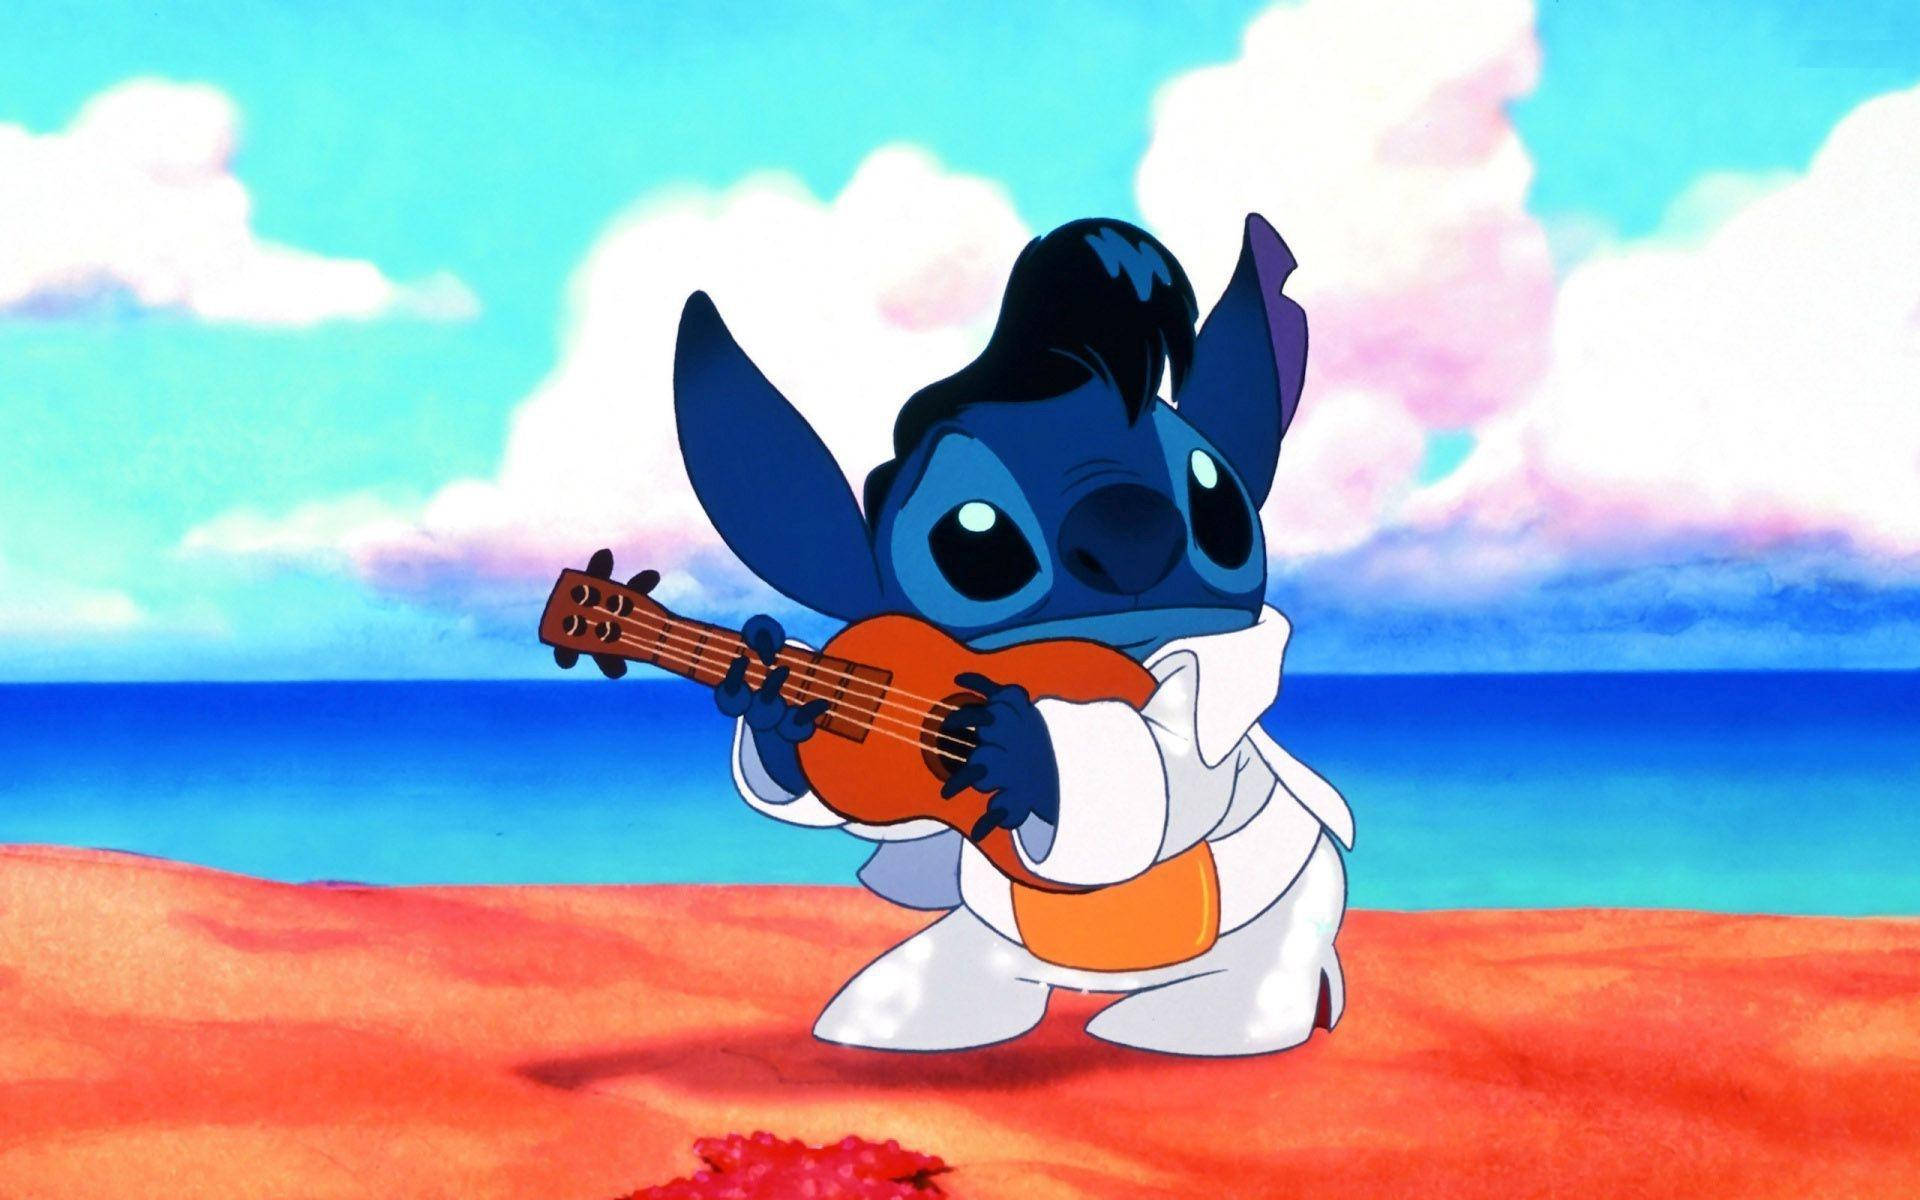 Cute Aesthetic Stitch With Guitar Background